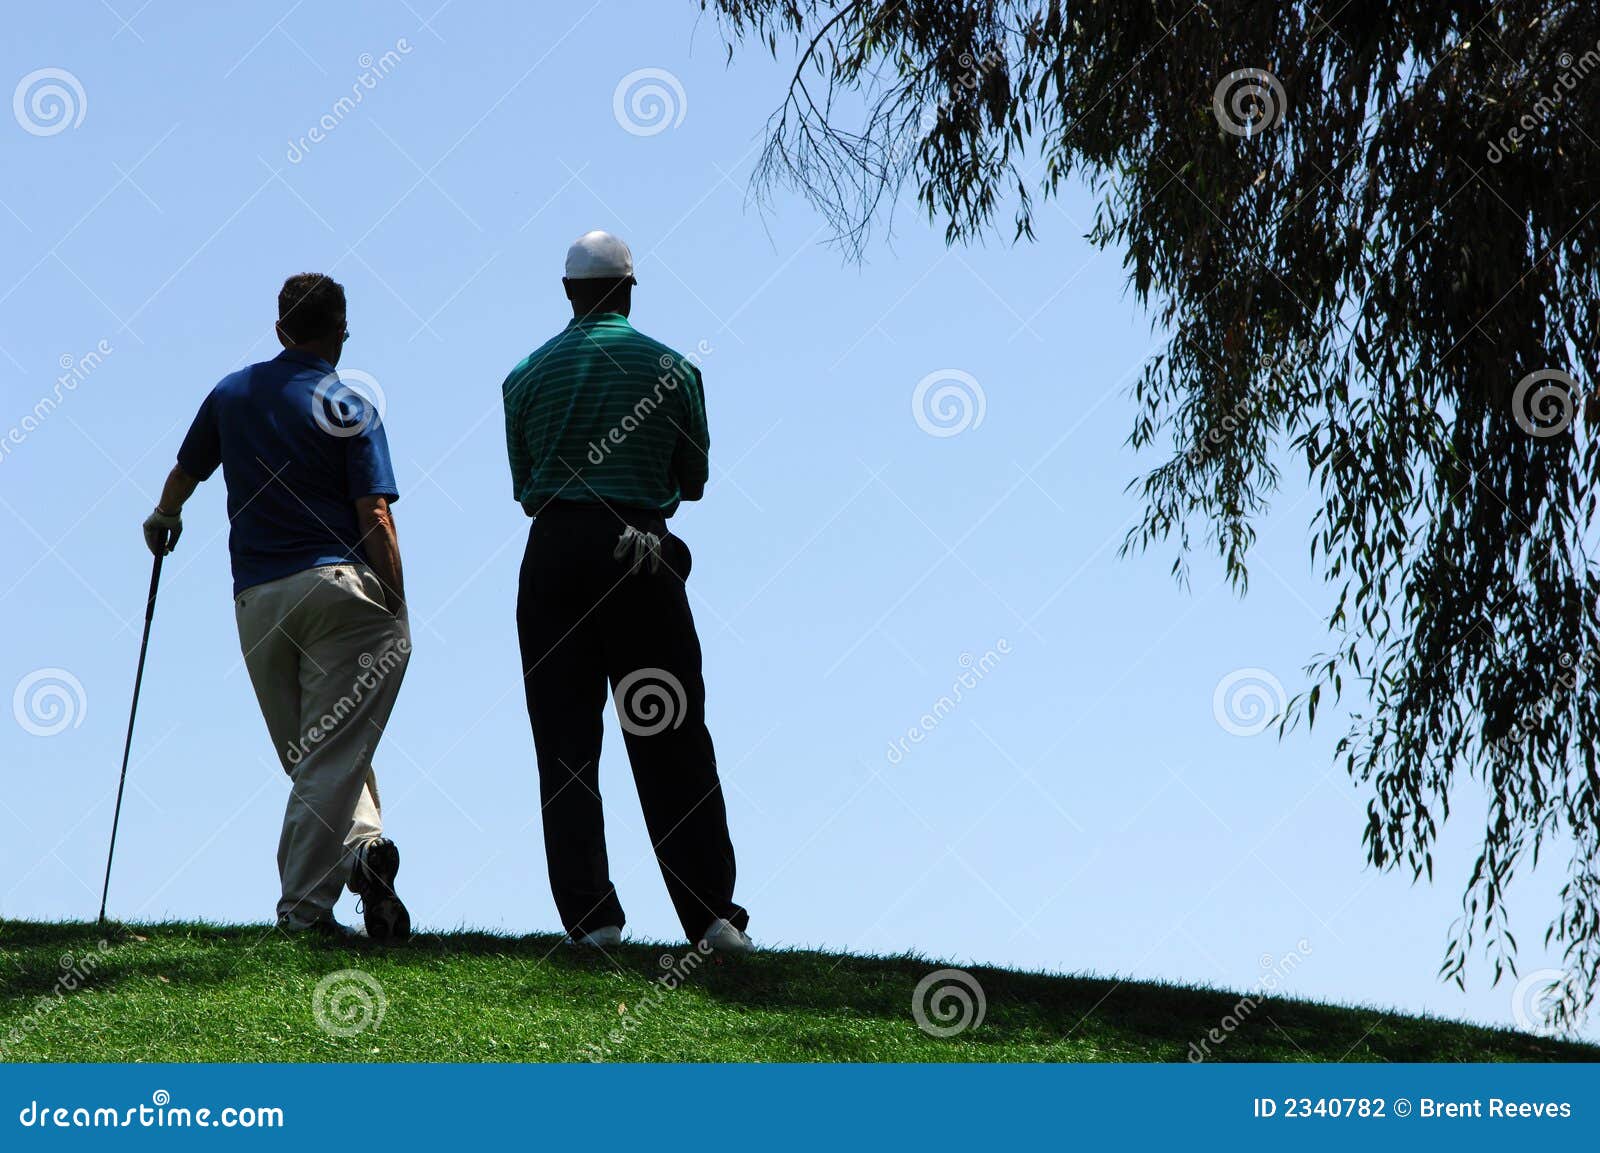 golfers wait for turn to putt